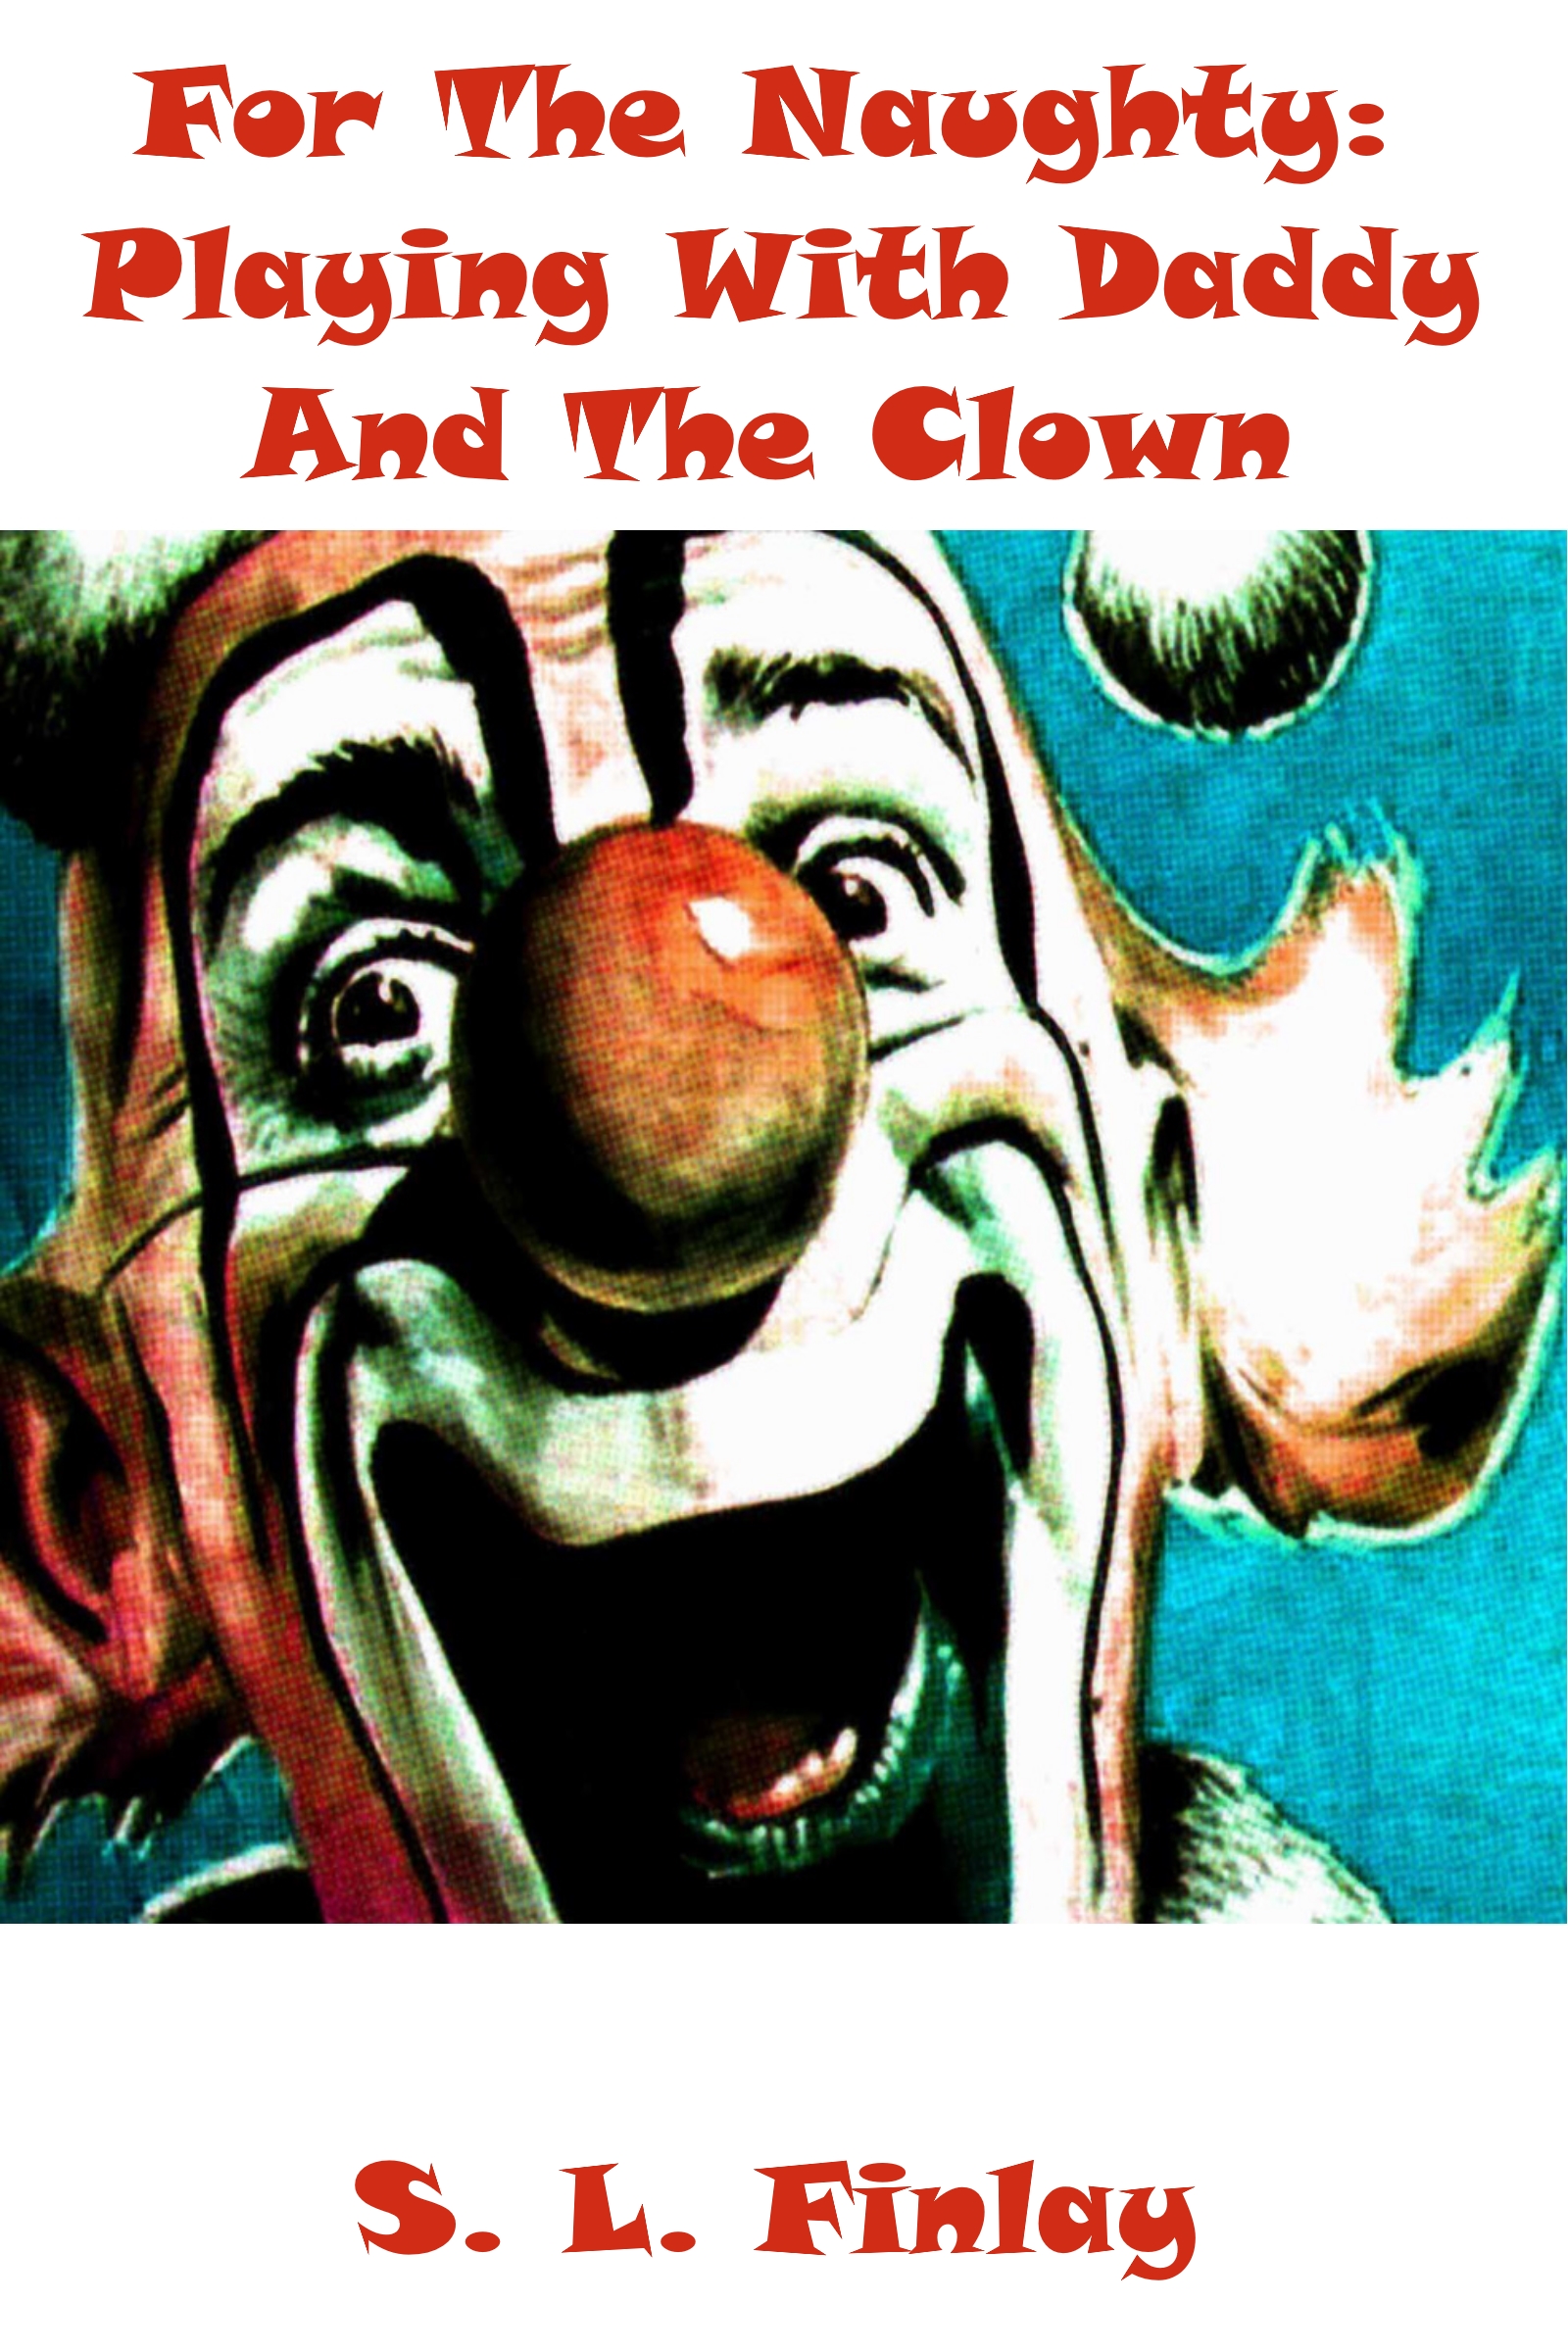 Naughty Clown Porn - For The Naughty: Playing With Daddy And The Clown, an Ebook by S. L. Finlay